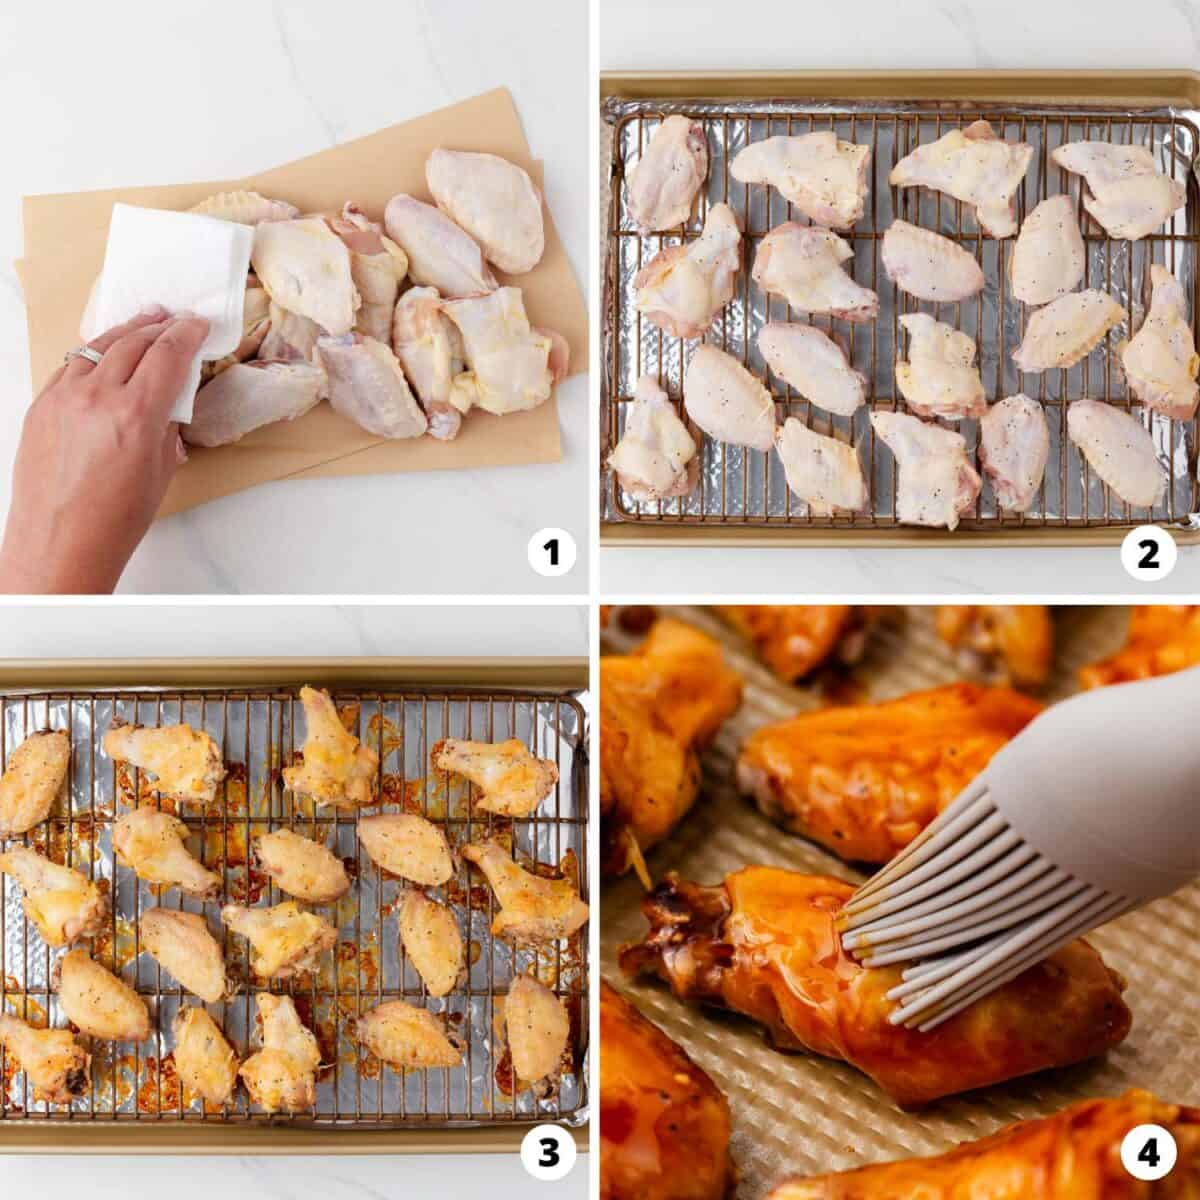 Showing how o make baked chicken wings in a 4 step collage.